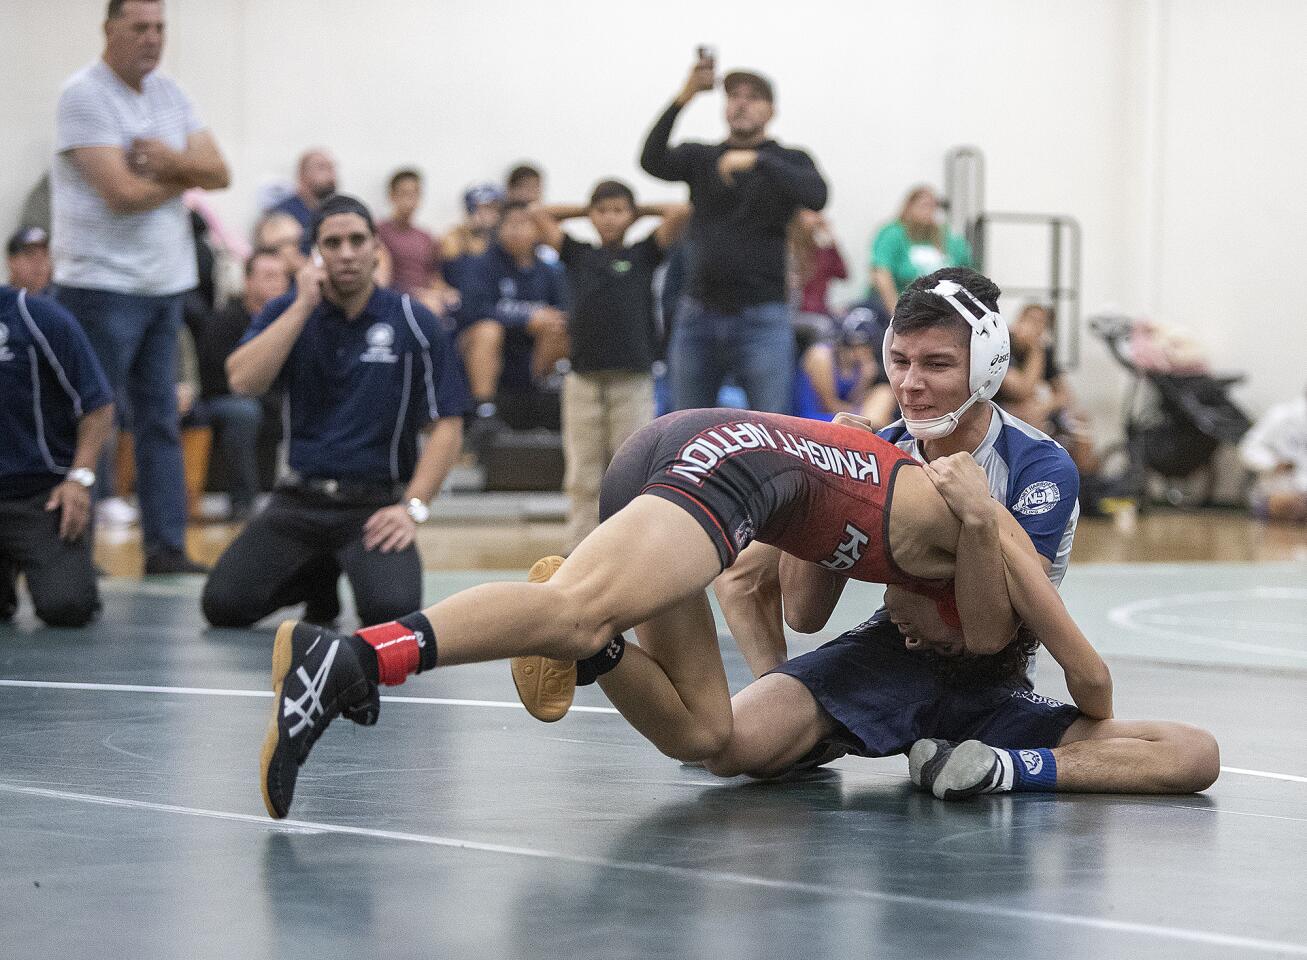 Newport Harbor's Edwin Leon wrestles against Katella's Adam Martinez in the 120 weight class during the Costa 4-Way Duals at Costa Mesa High School on Thursday, November 29.